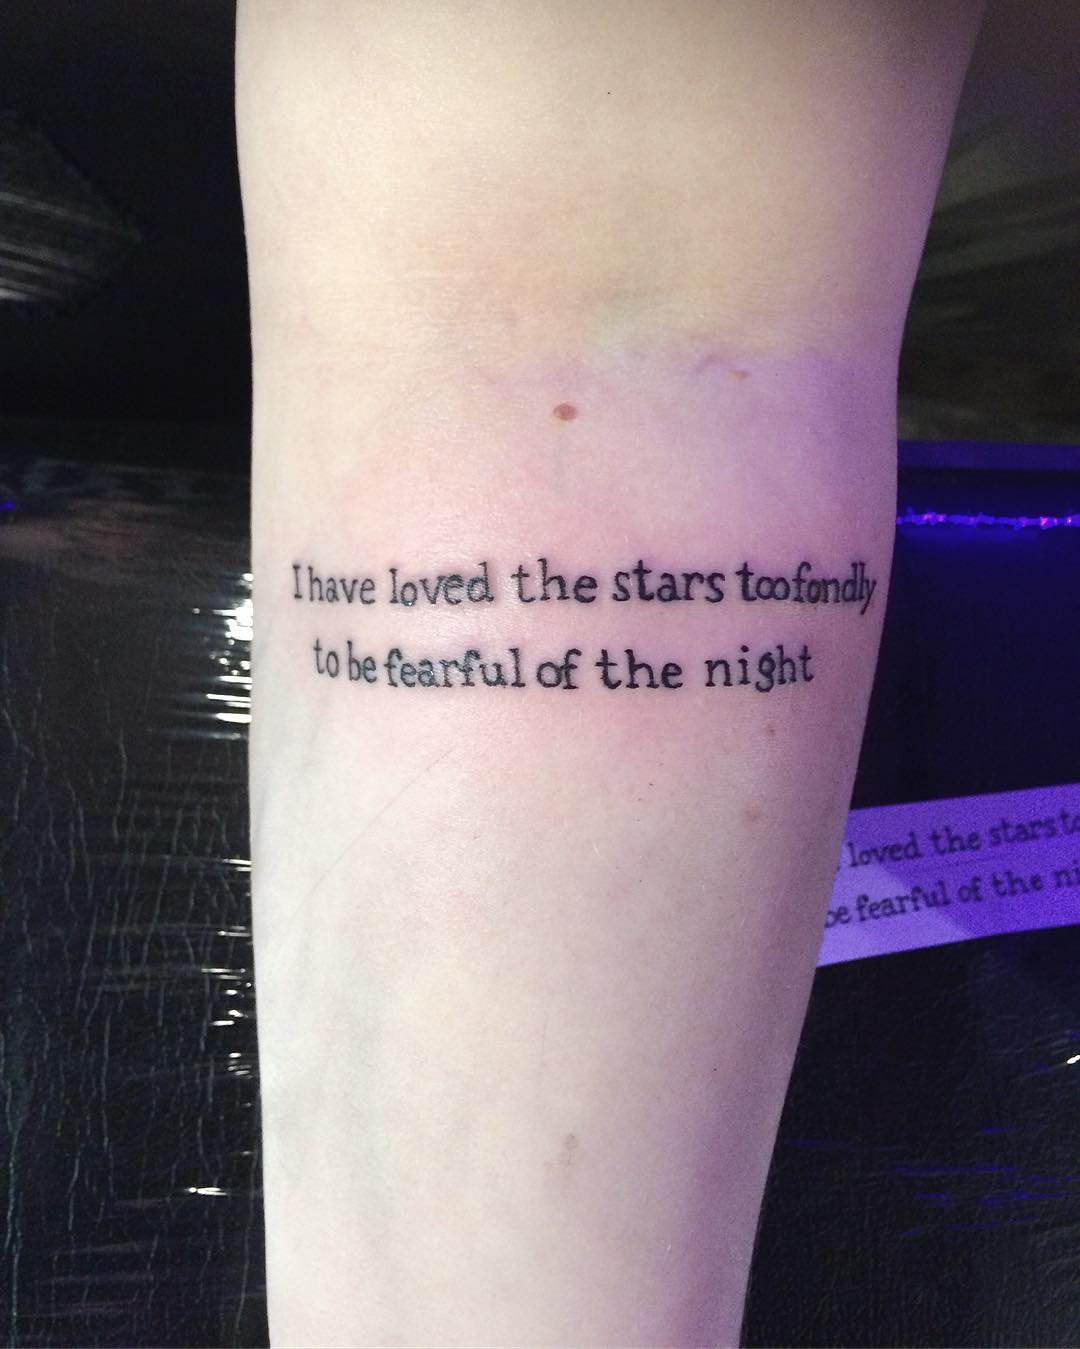 Instagram Poetry Is Trending for Tattoos  Inside Out